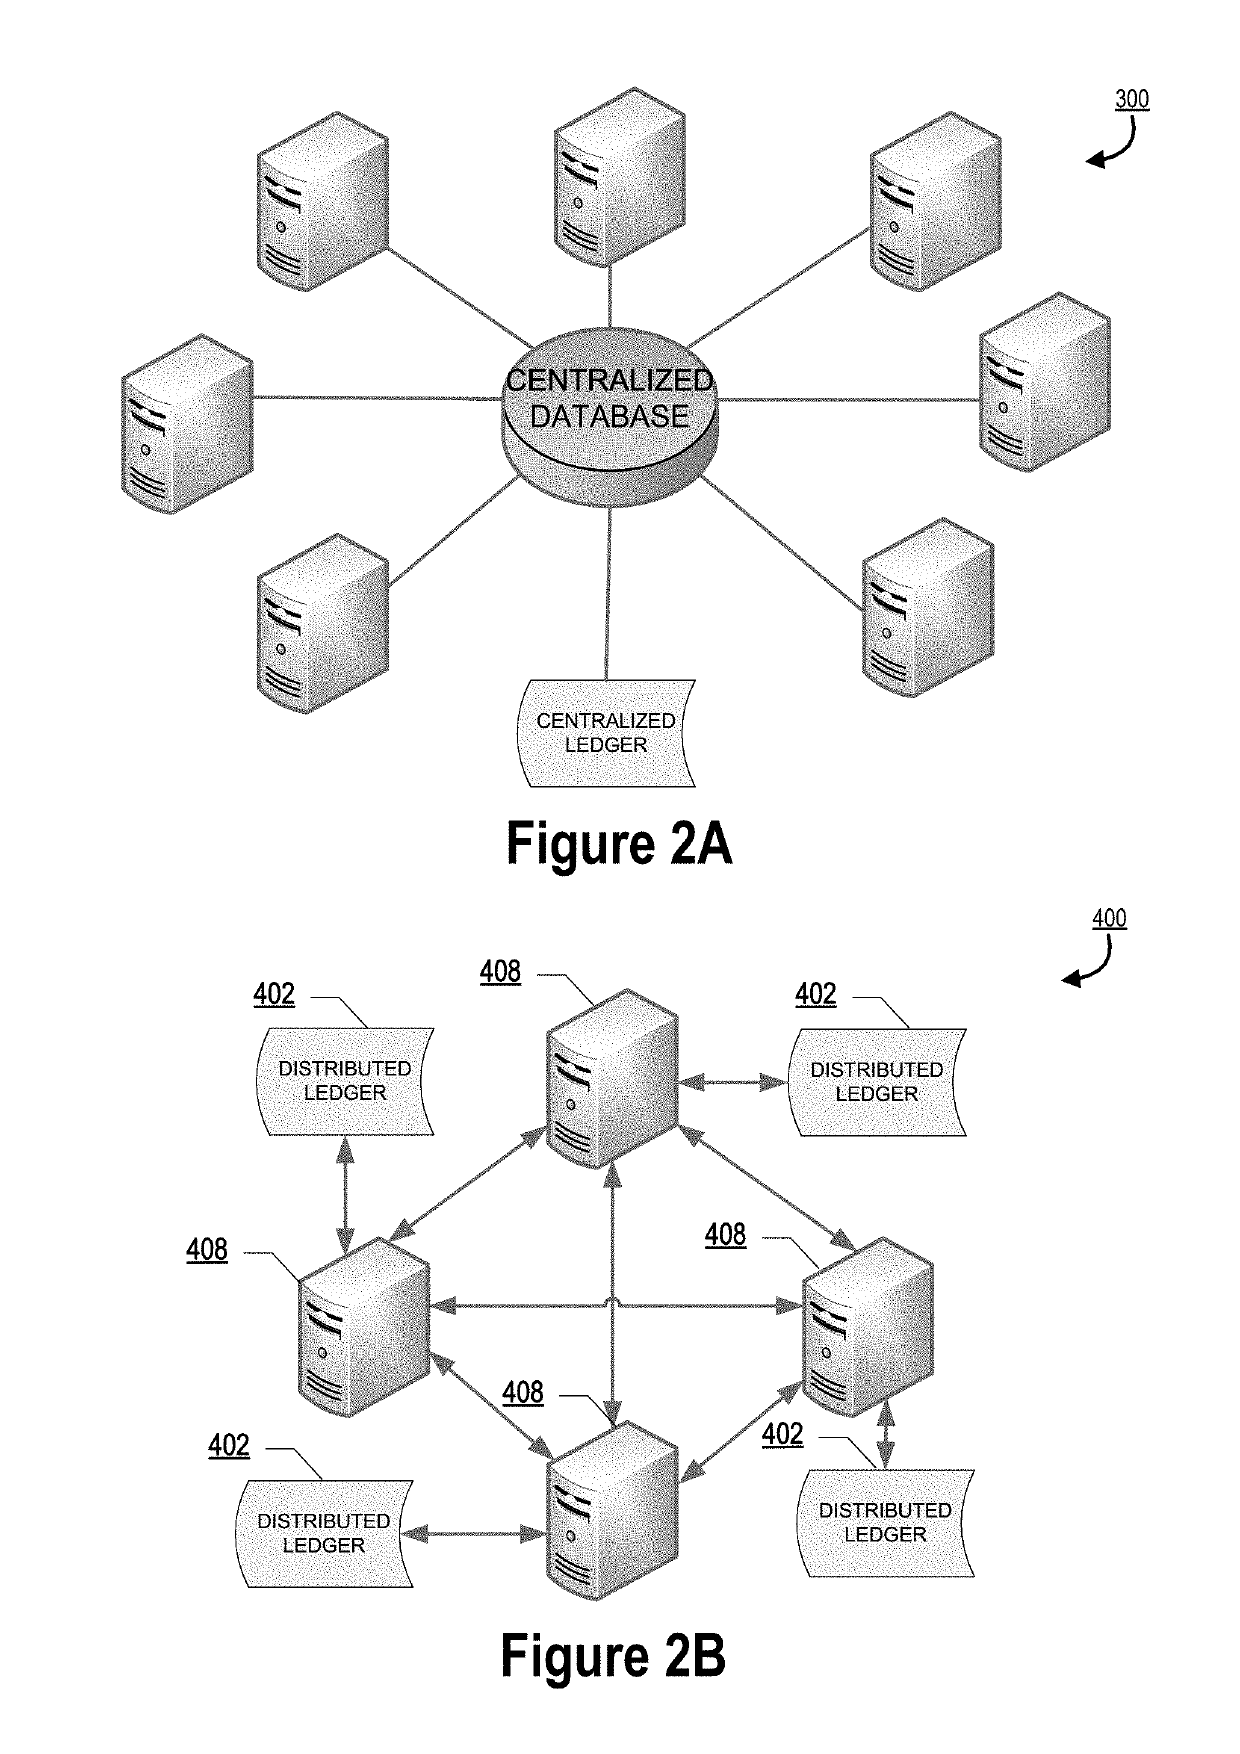 System for external validation of private-to-public transition protocols